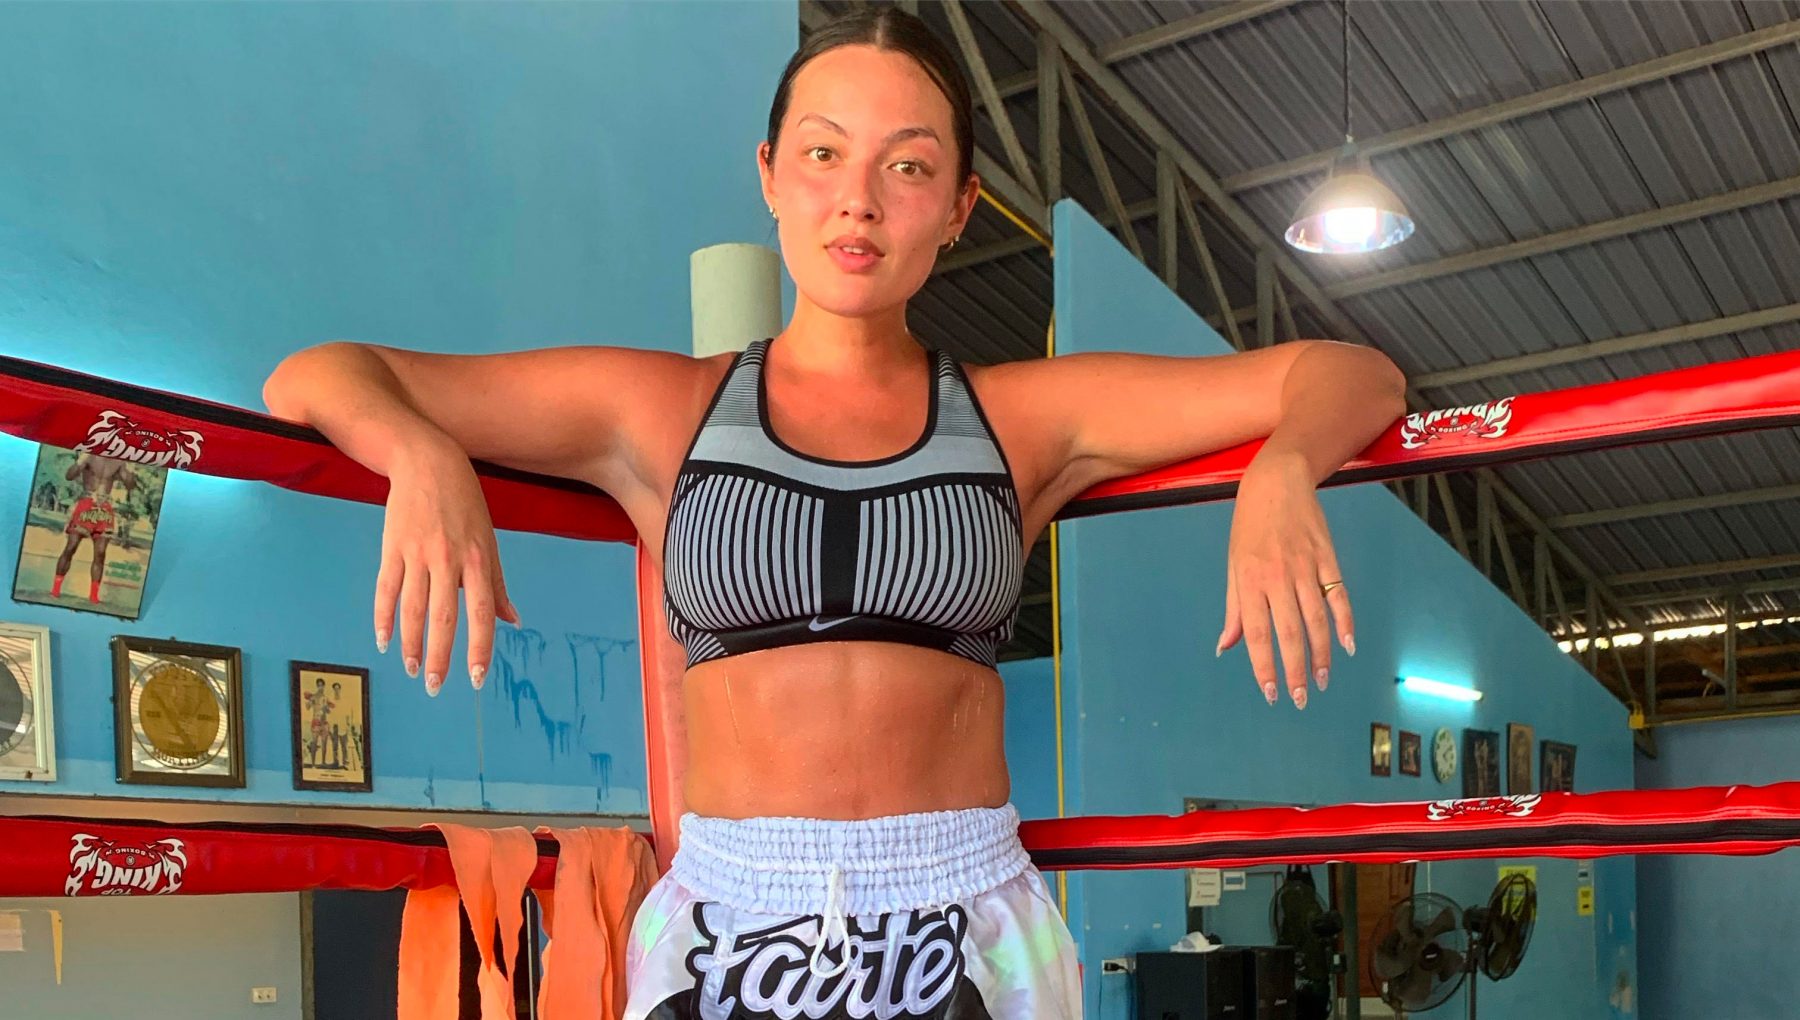 Model Mia Kang On How Muay Thai Boxing Taught Her About Confidence 4864